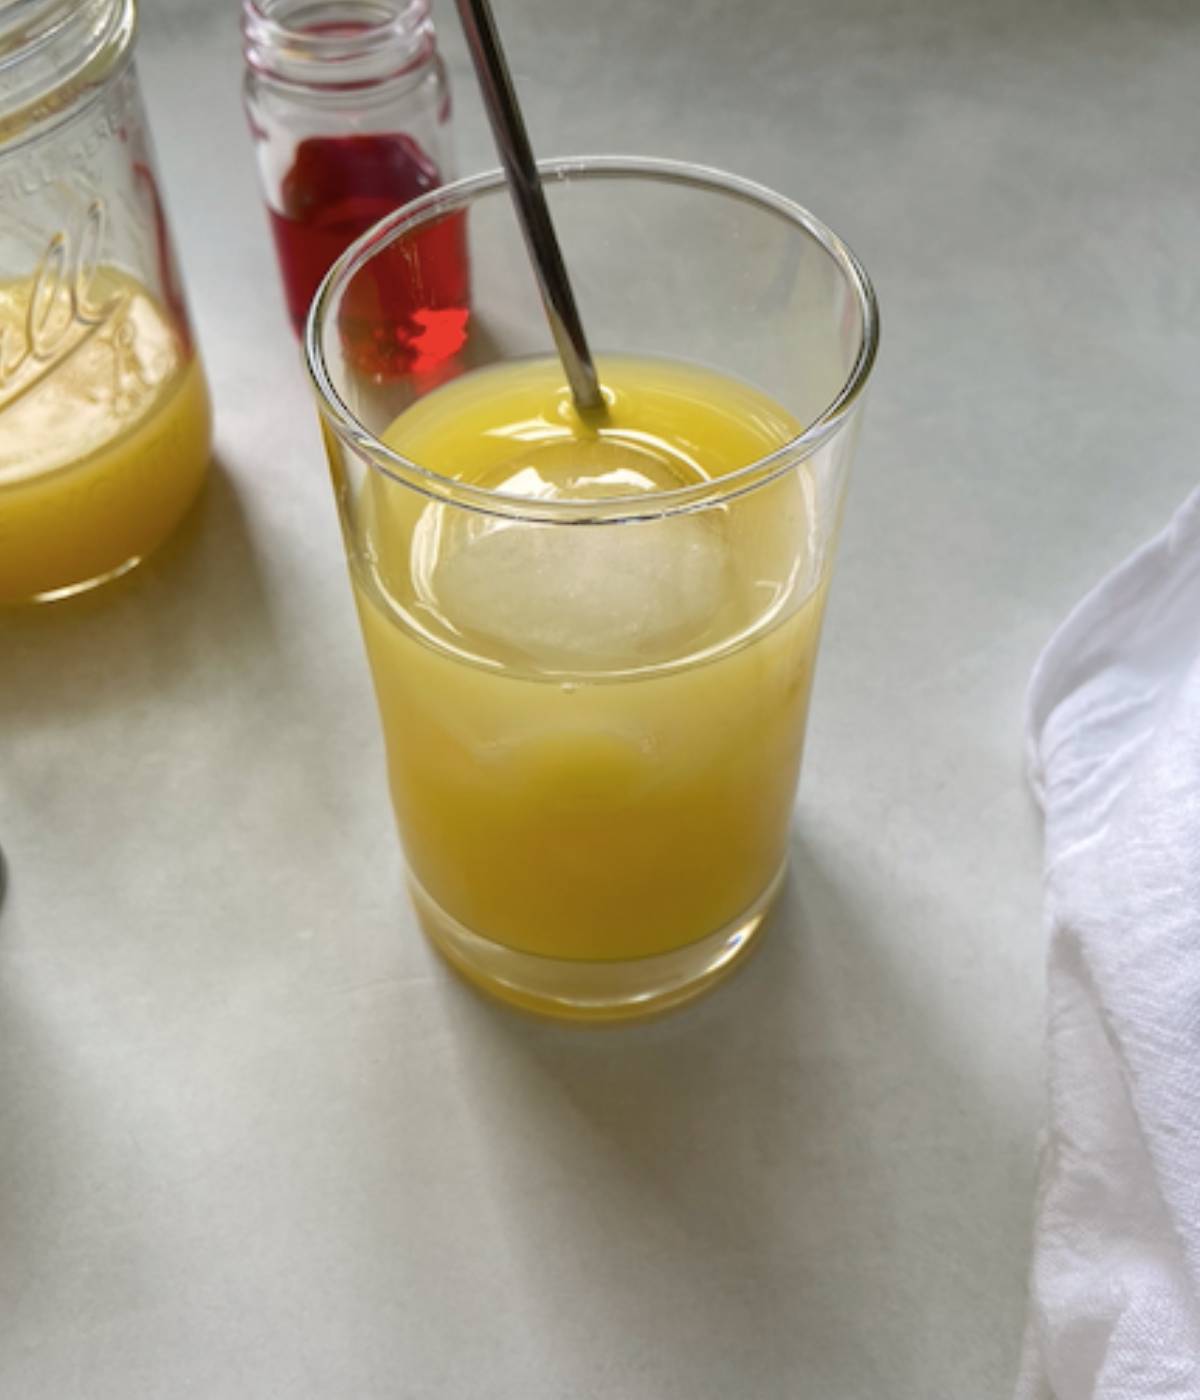 Orange juice and vodka in a glass with ice and spoon.